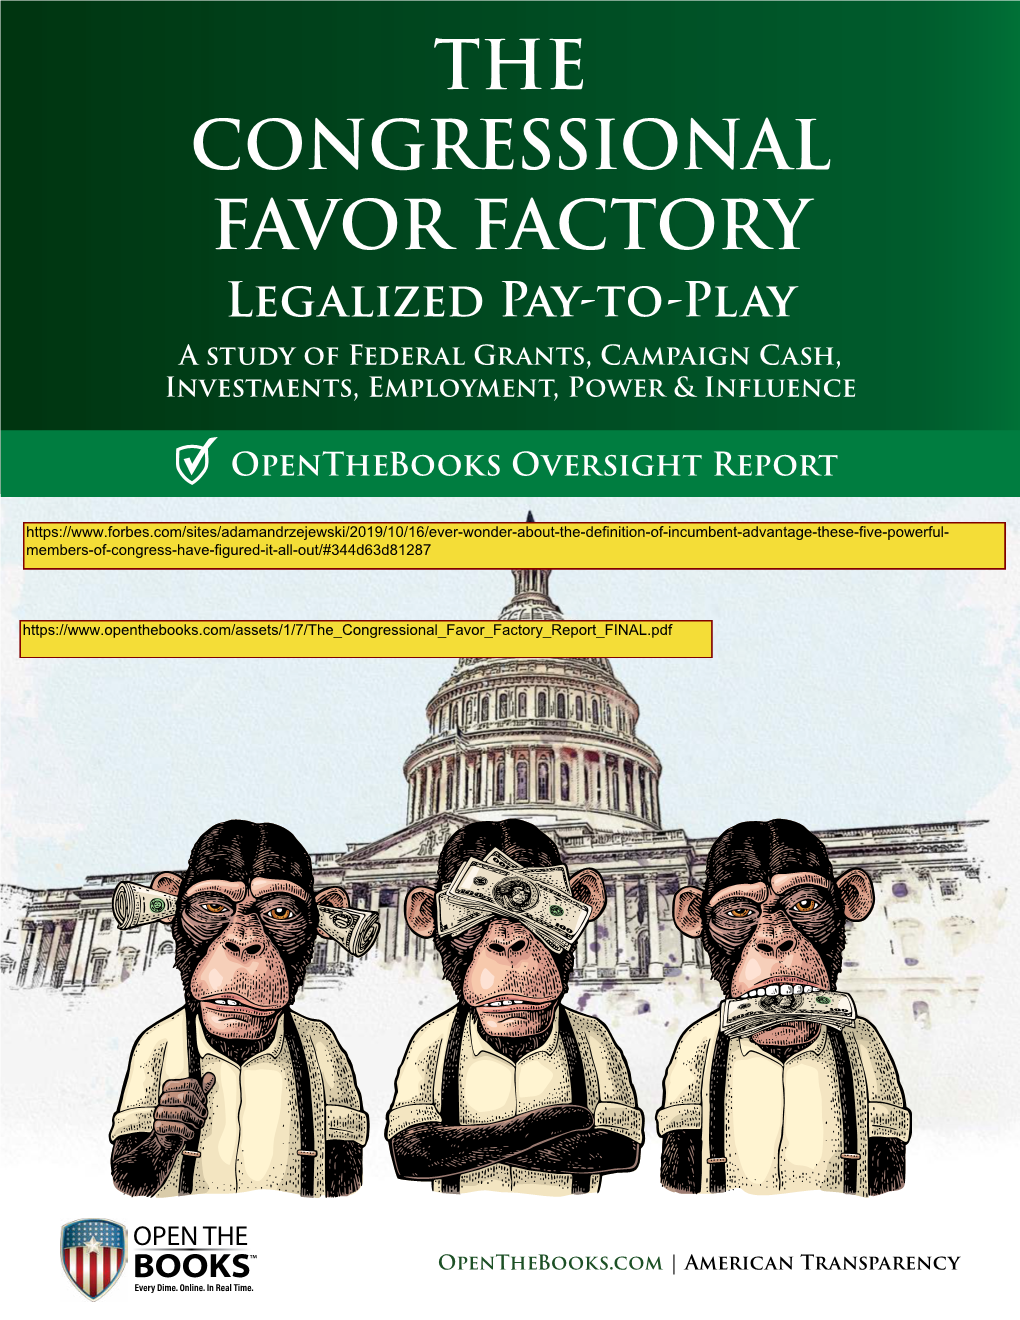 THE CONGRESSIONAL FAVOR FACTORY Legalized Pay-To-Pl Ay a Study of Federal Grants, Campaign Cash, Investments, Employment, Power & Influence